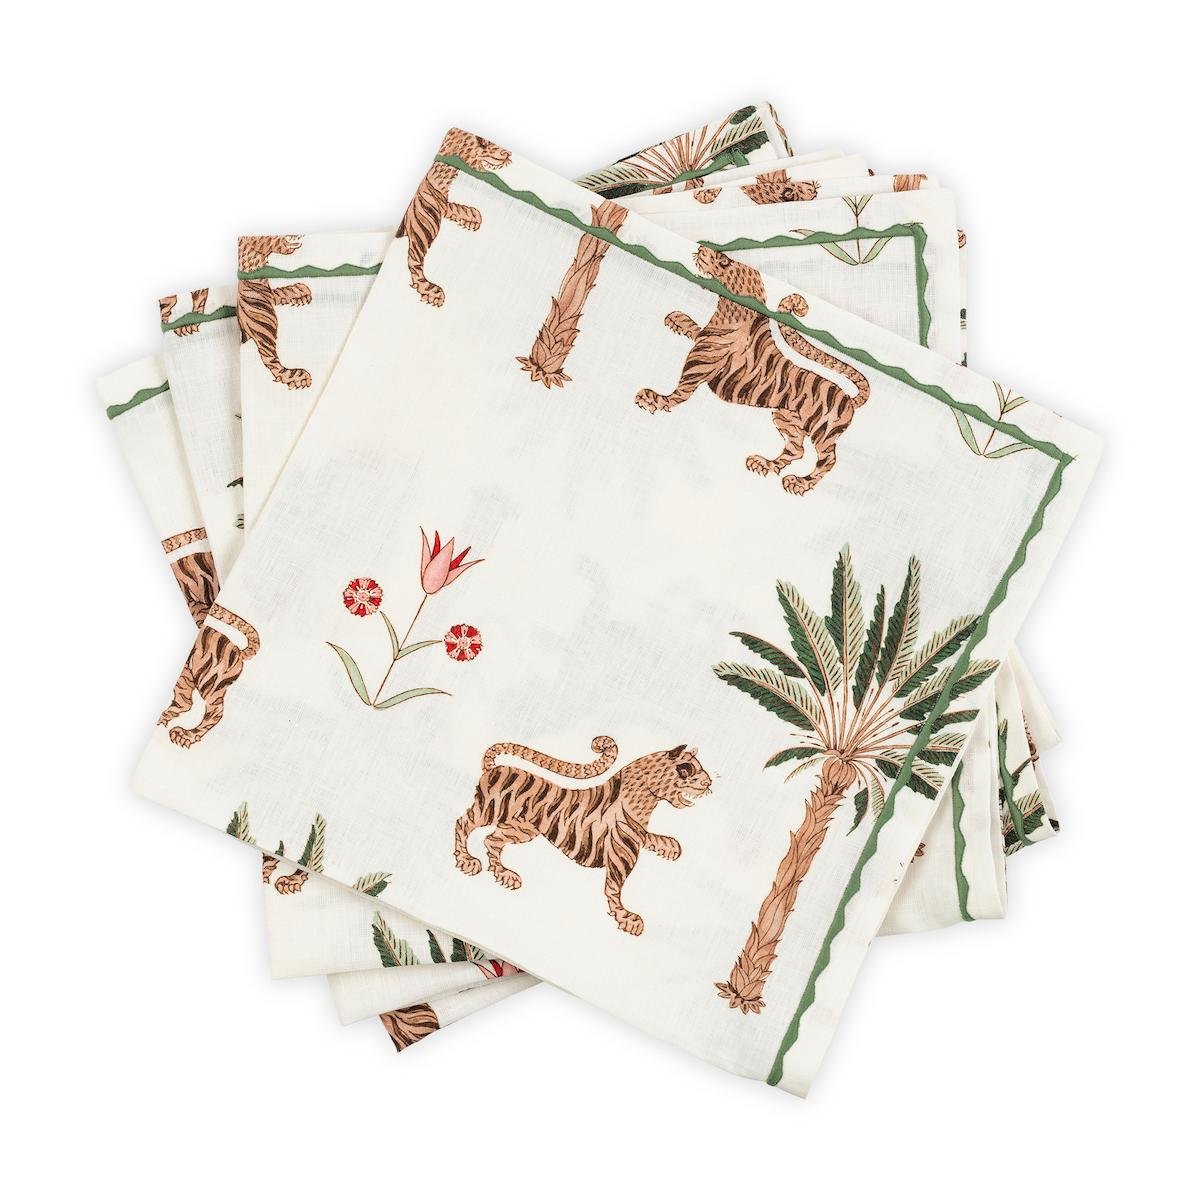 46466- Tiger Palm Napkin (10)- $35 - Purchased